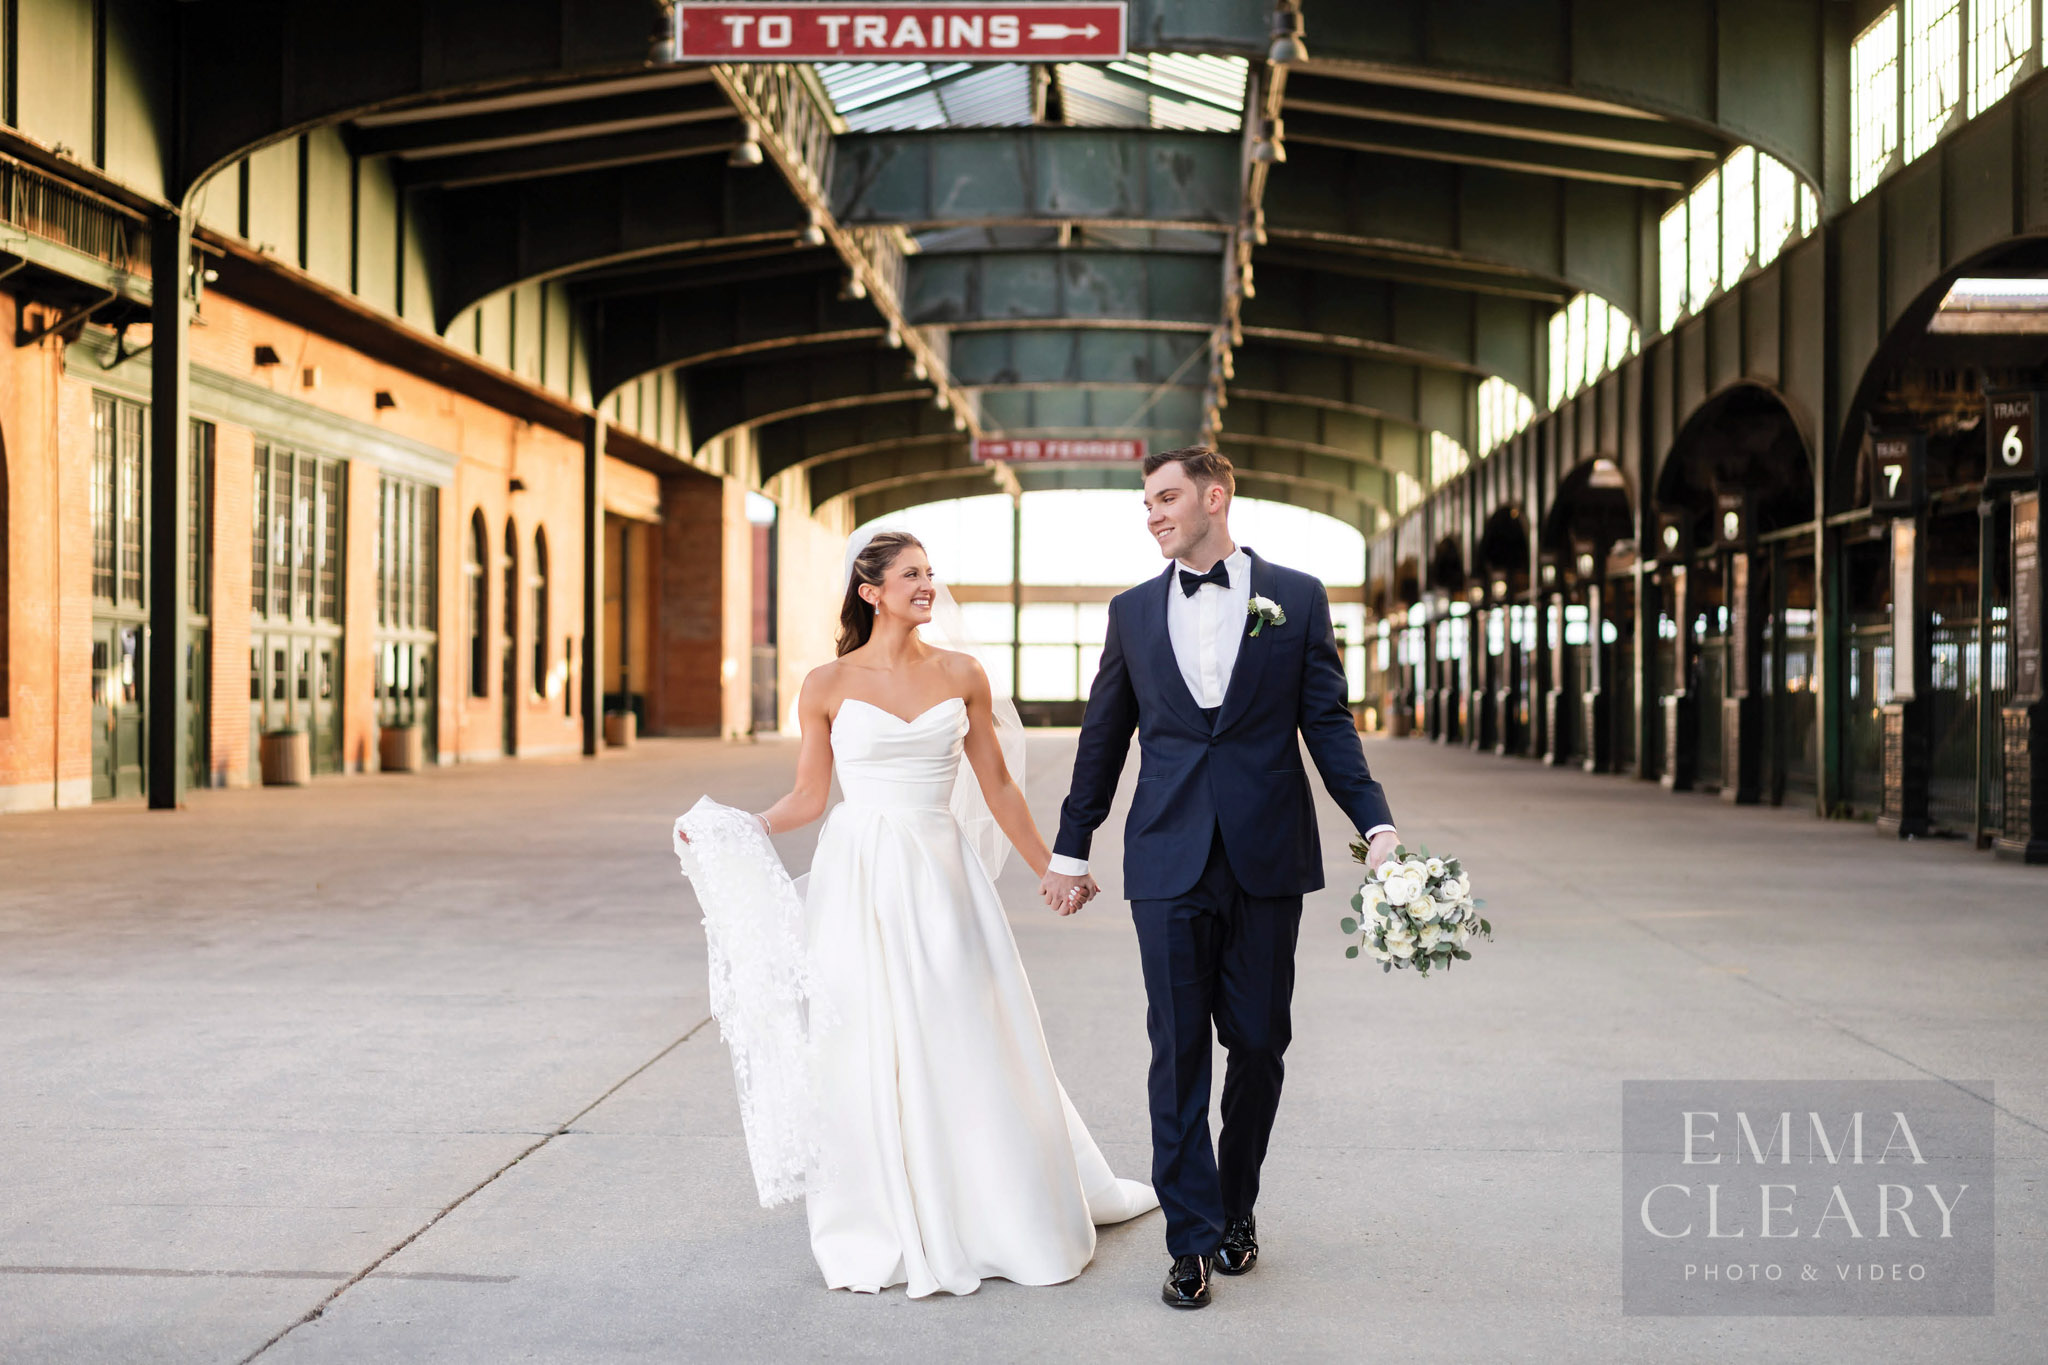 Bride and groom walking at the station